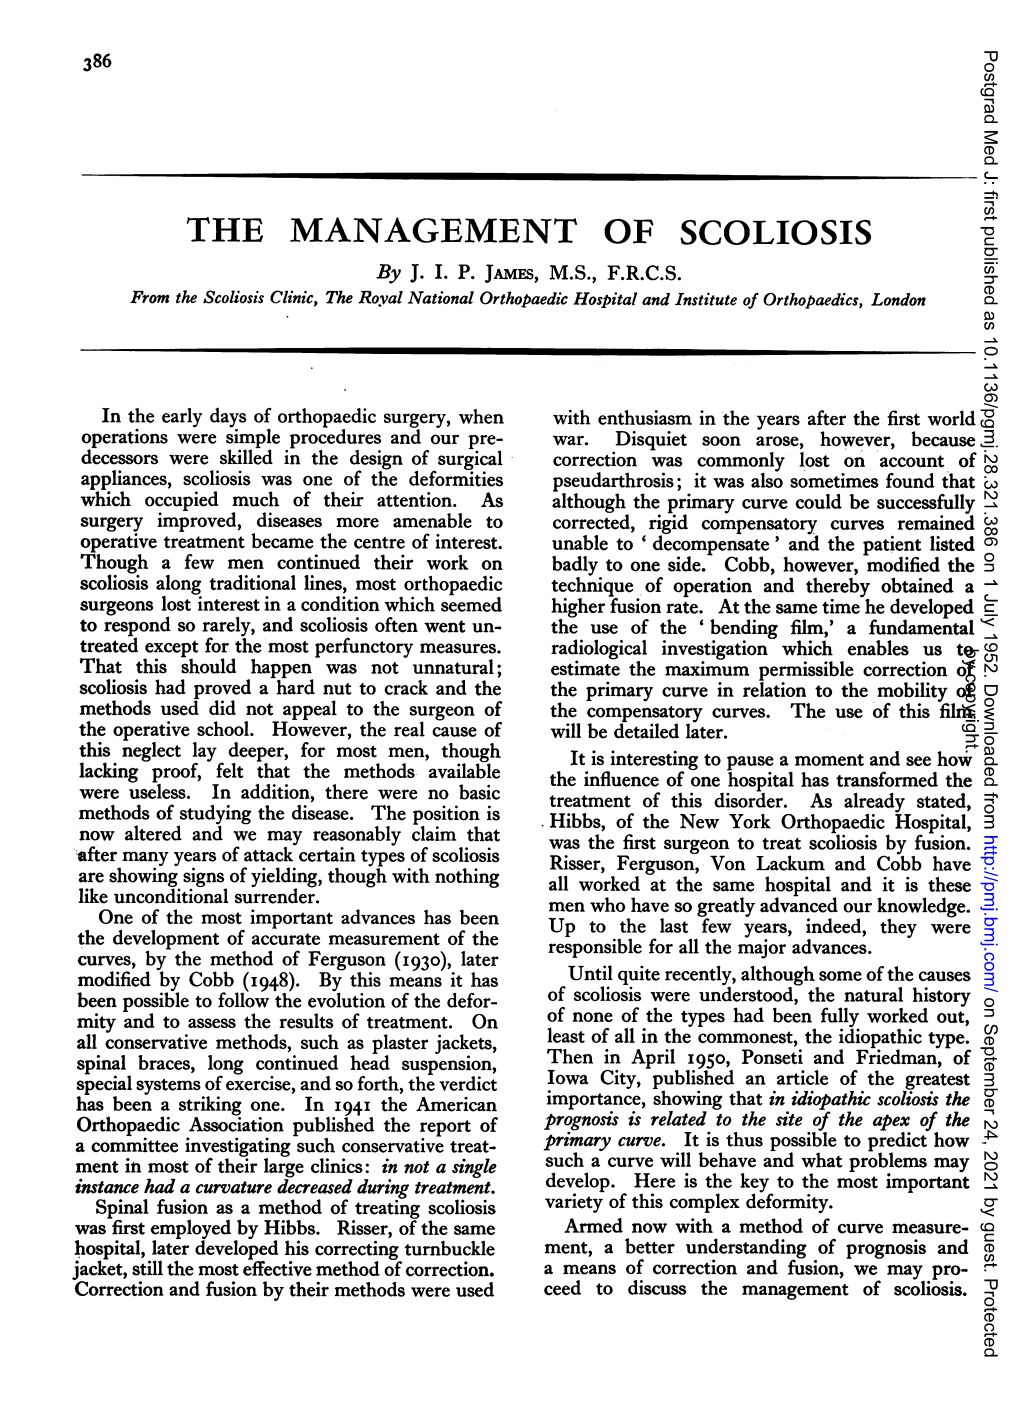 THE MANAGEMENT of SCOLIOSIS by J